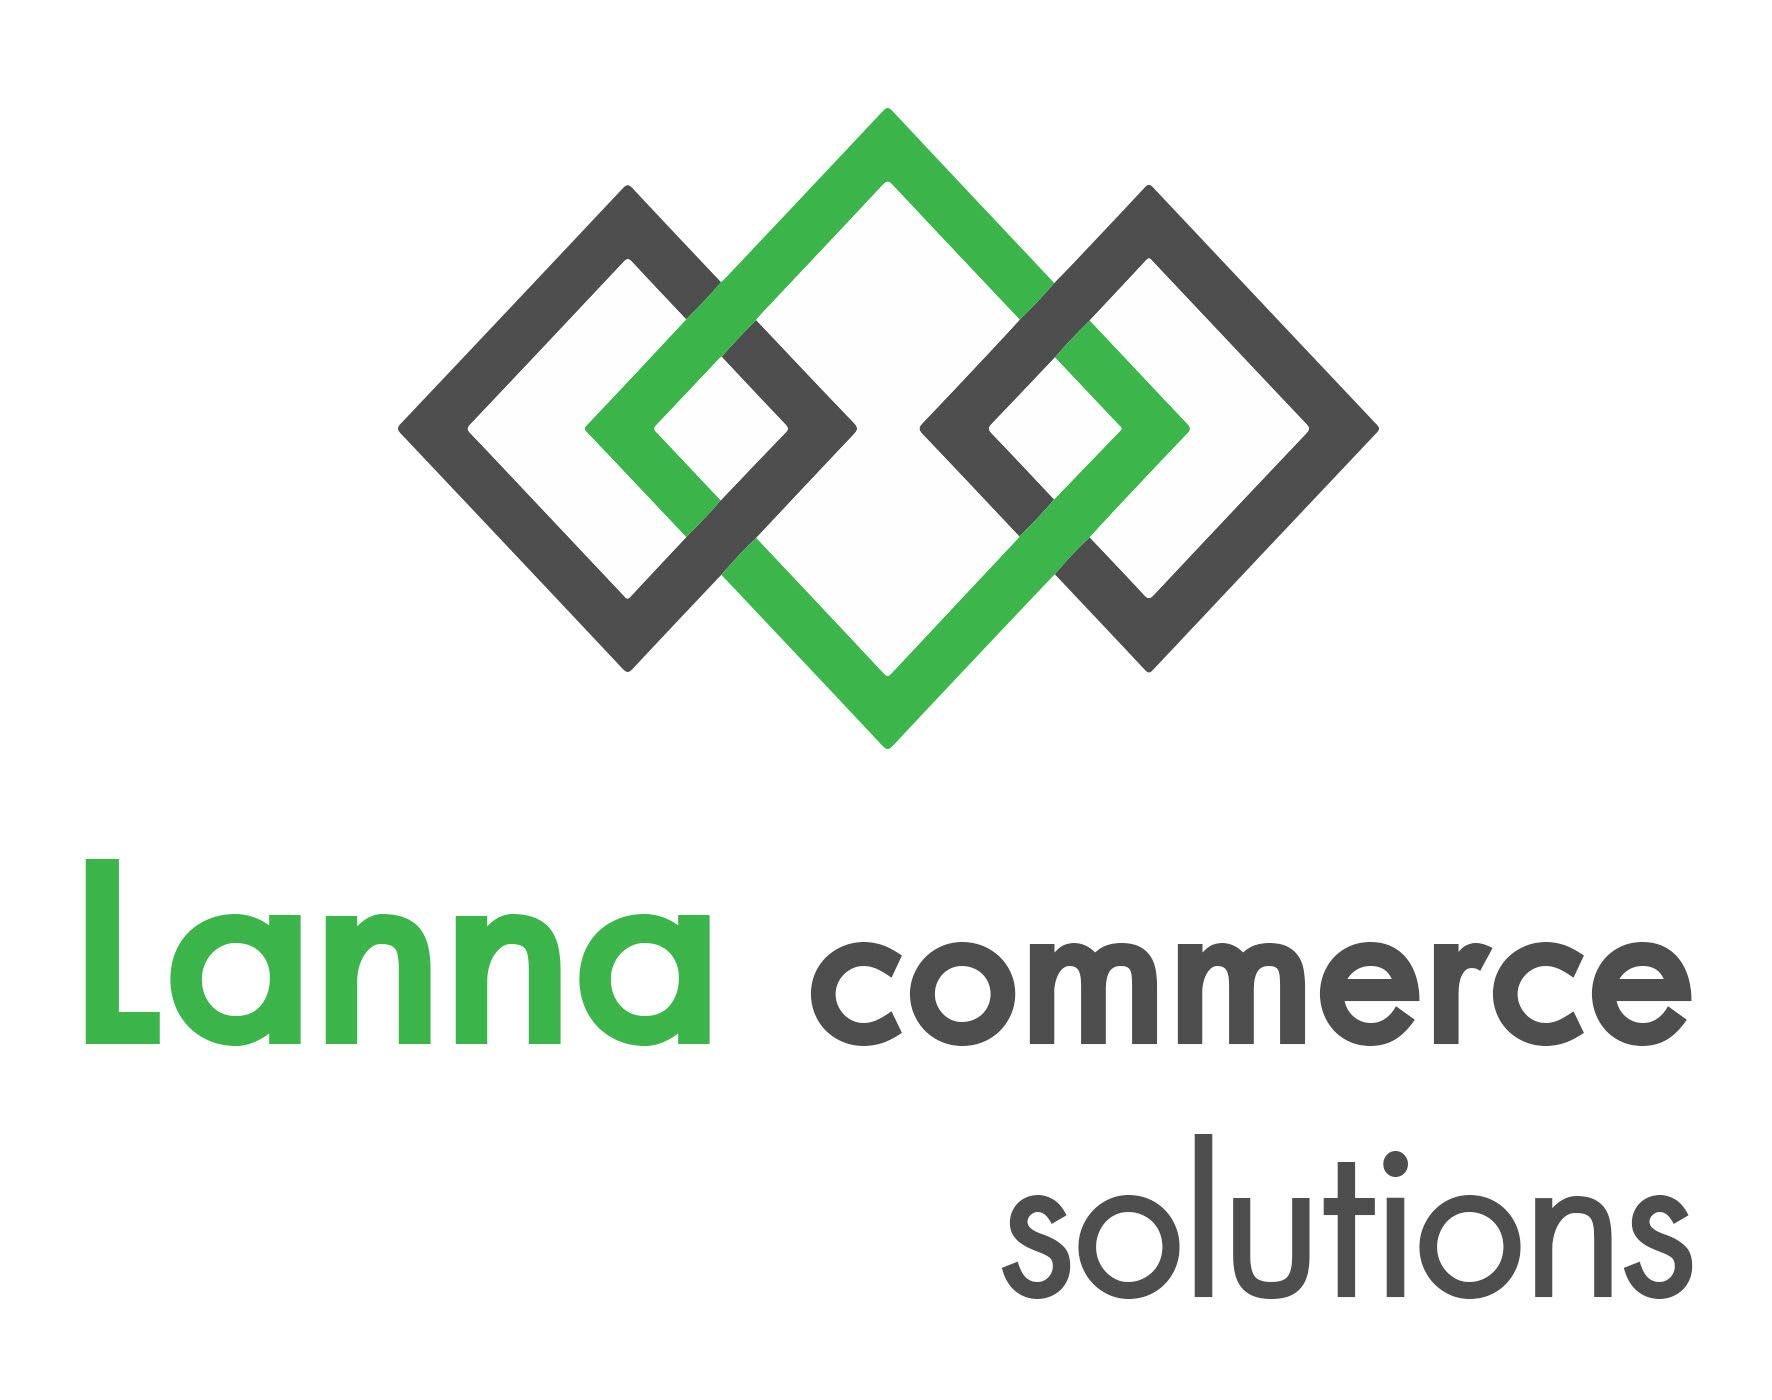 Lanna commerce Solutions